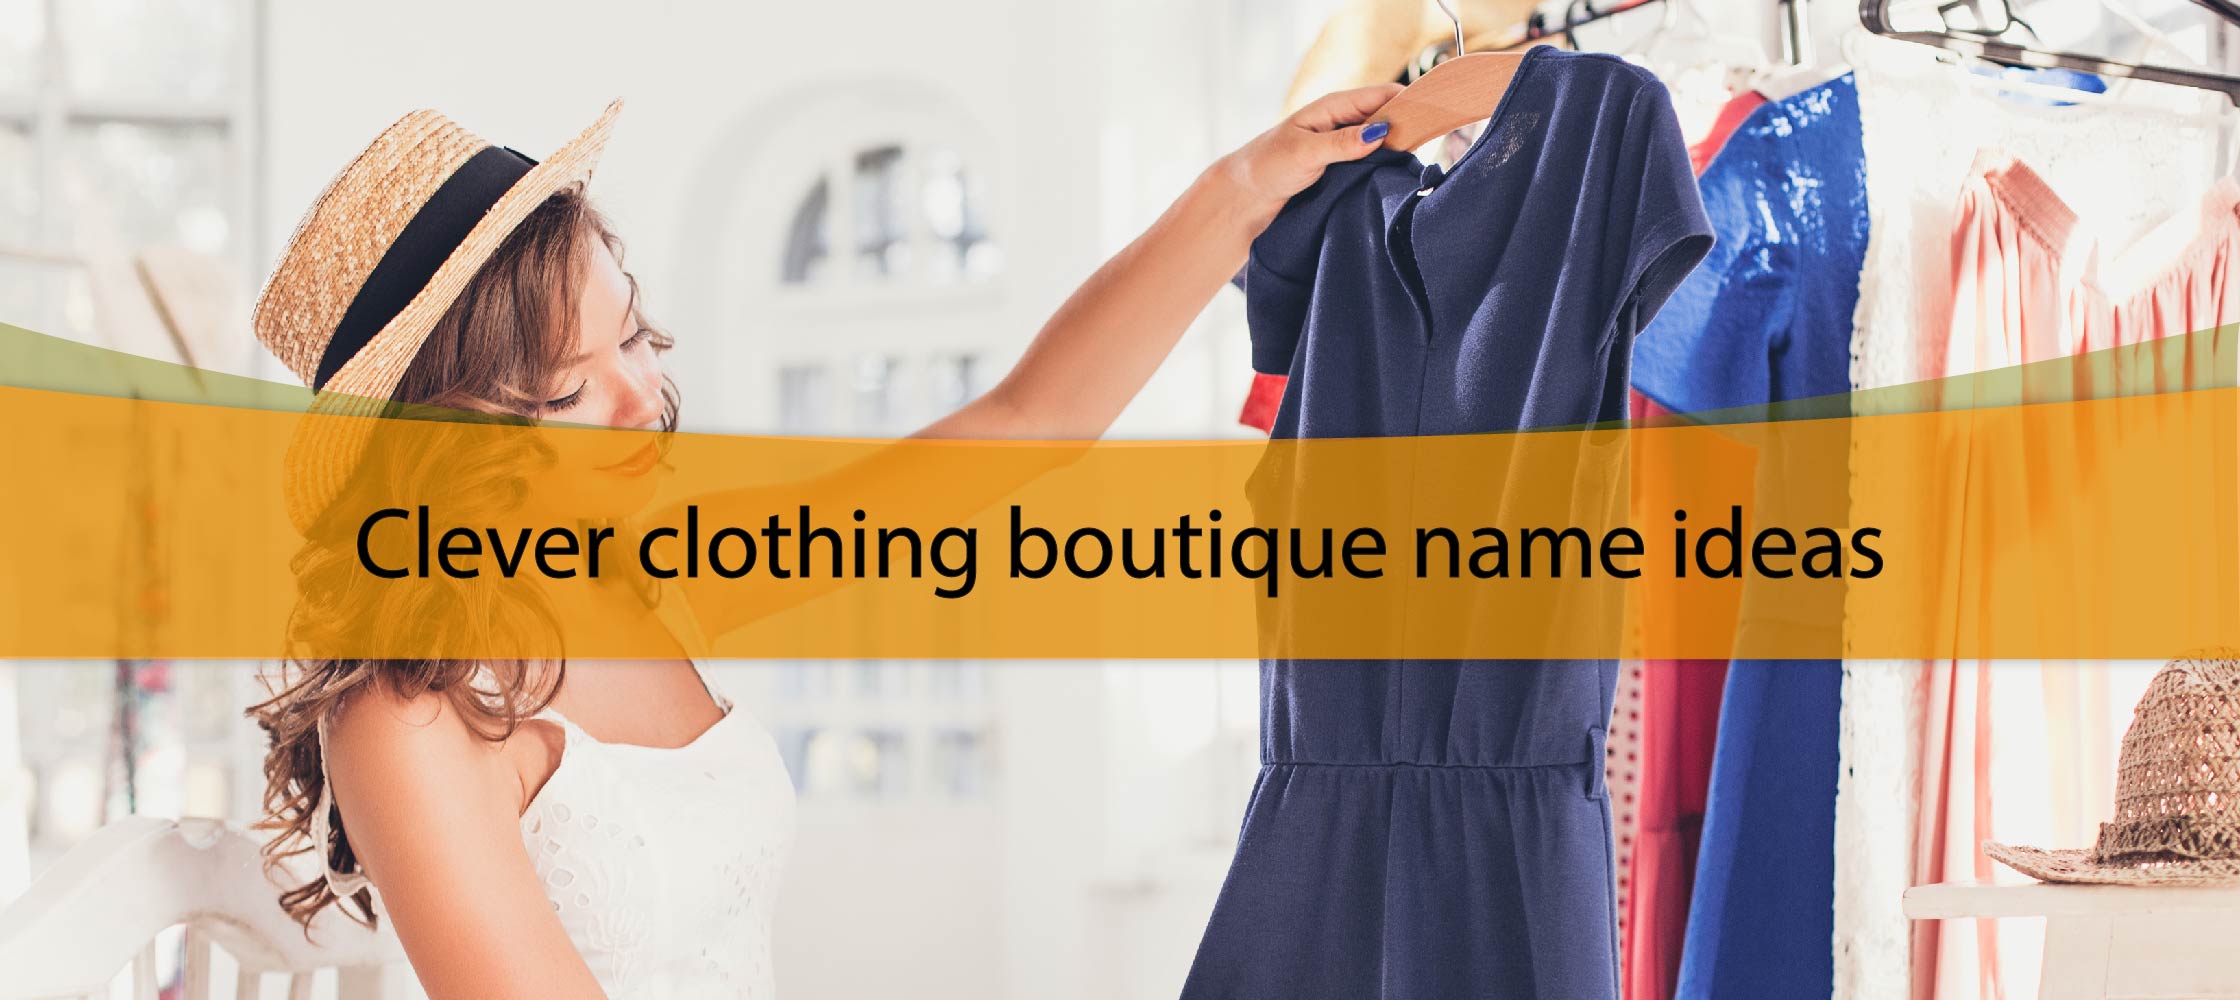 Clever clothing boutique name ideas